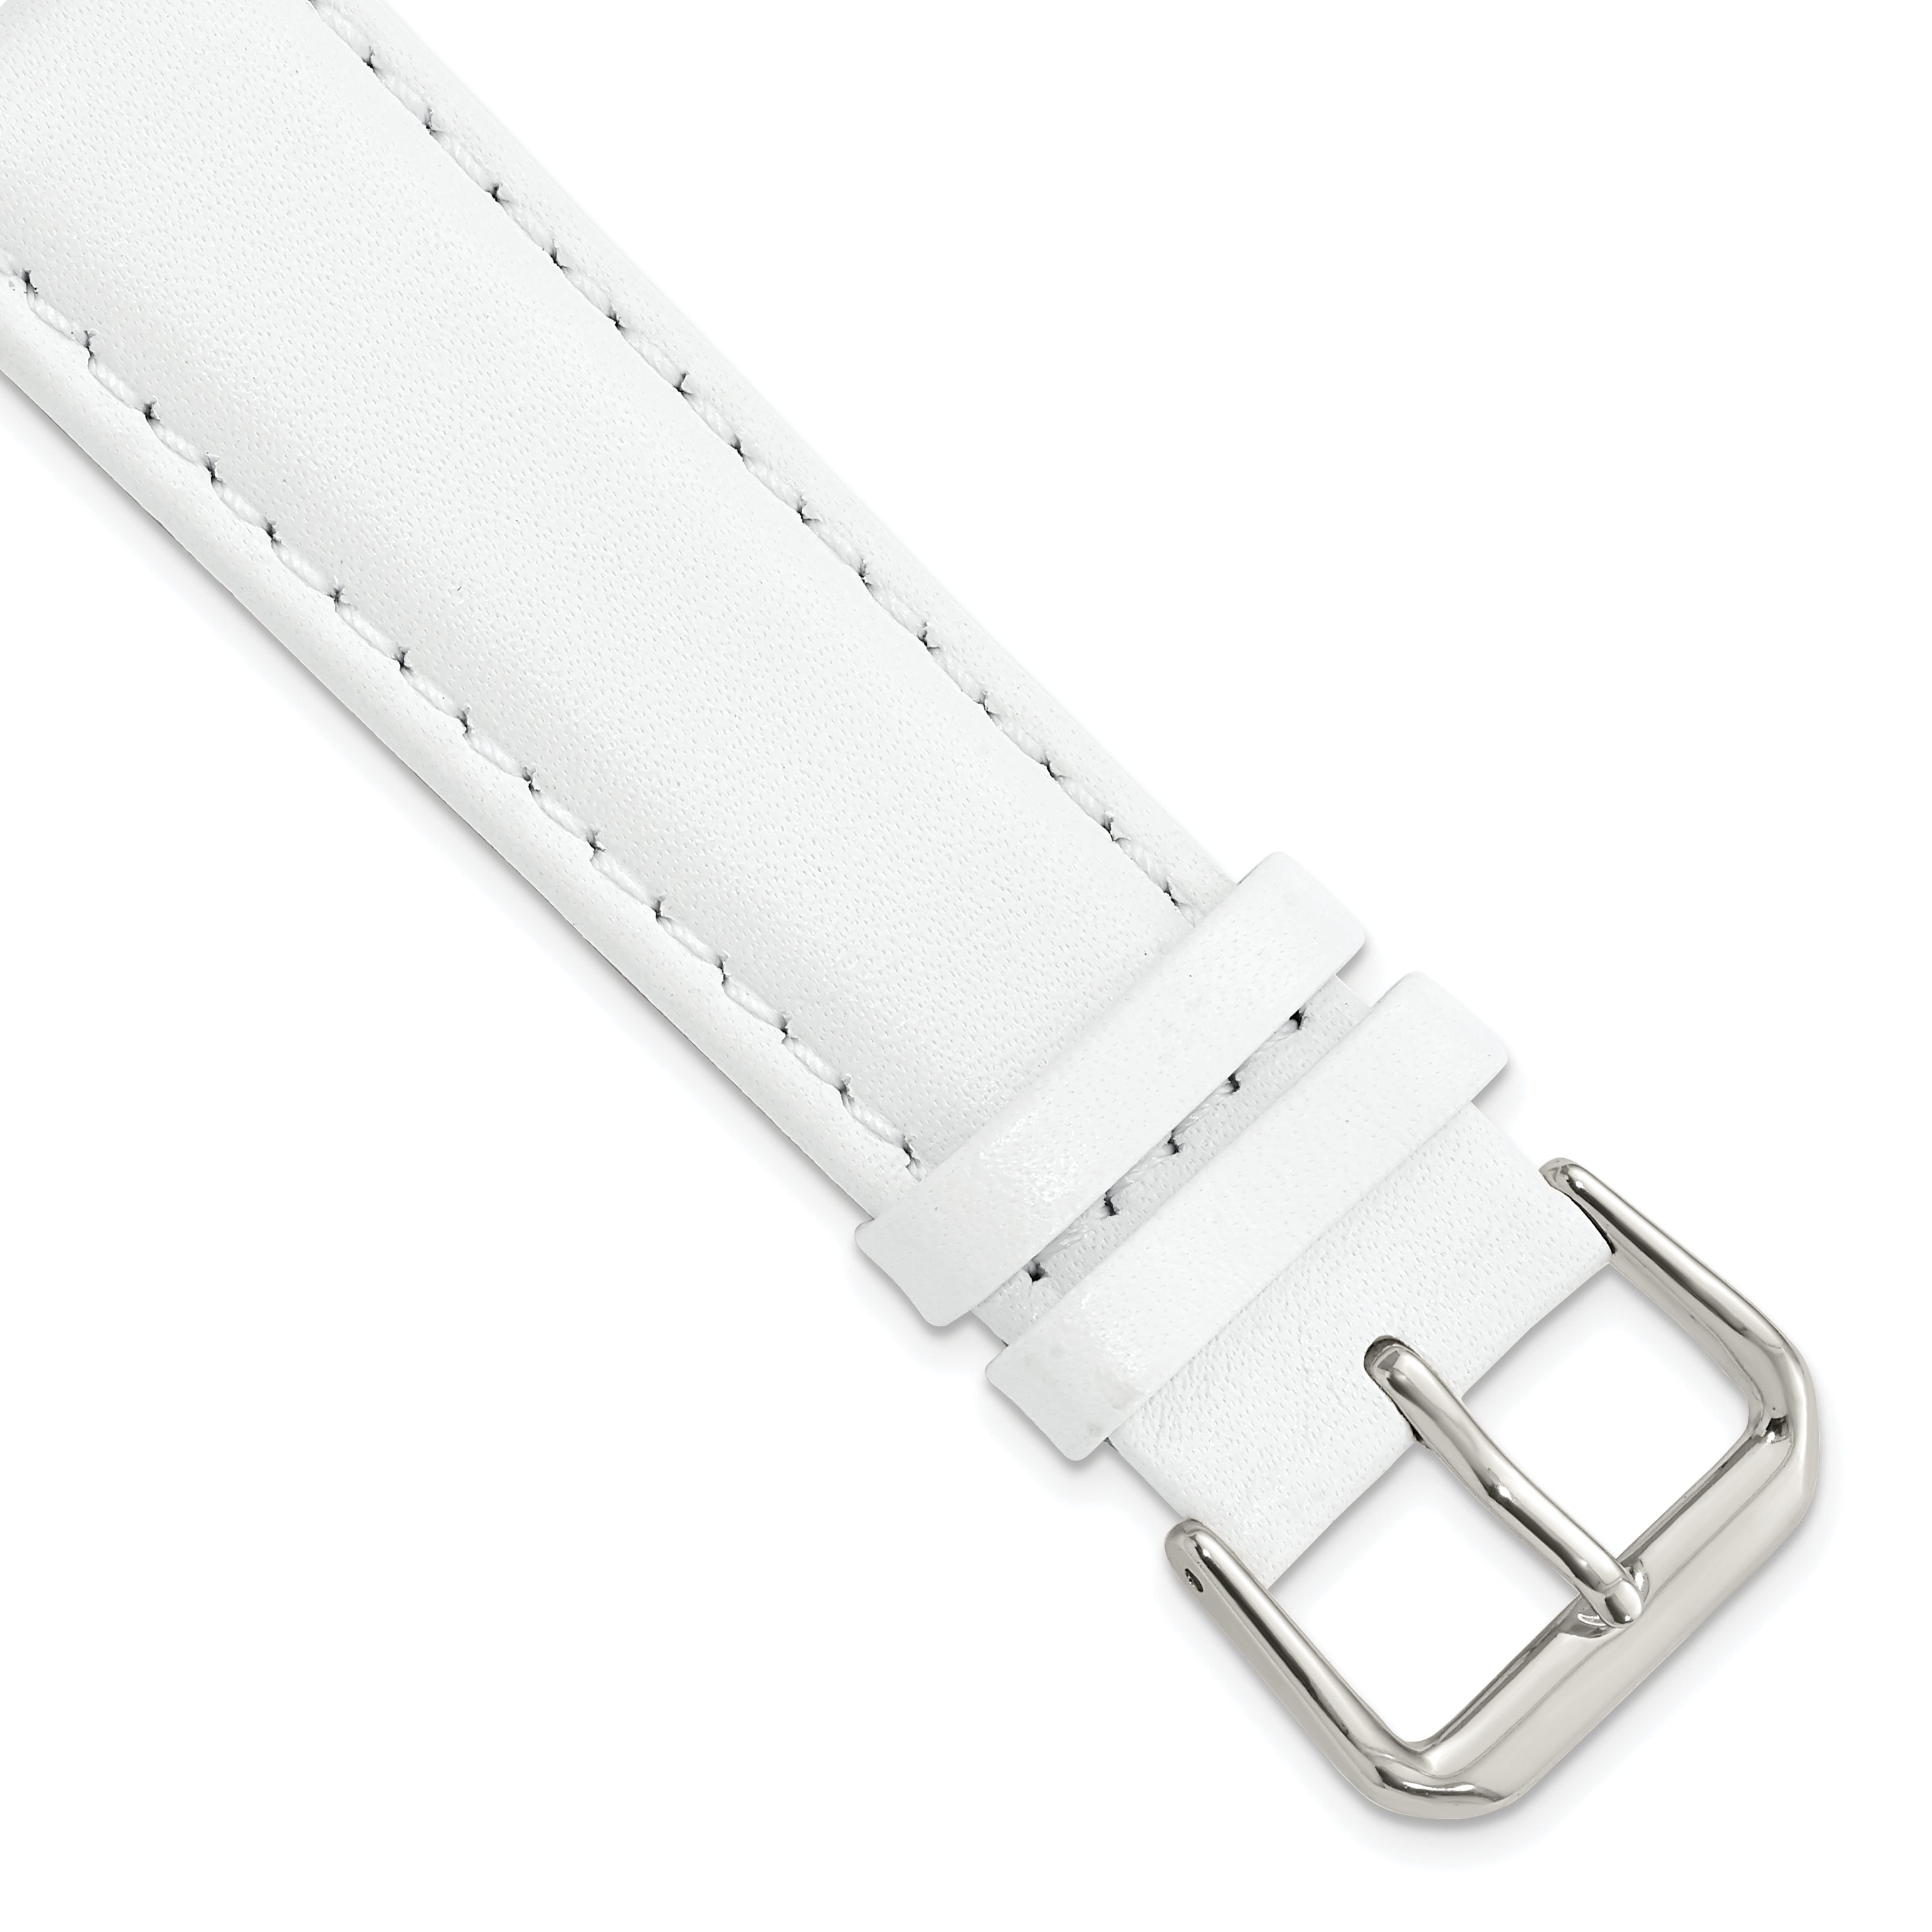 DeBeer 20mm White Smooth Leather with Silver-tone Buckle 7.5 inch Watch Band